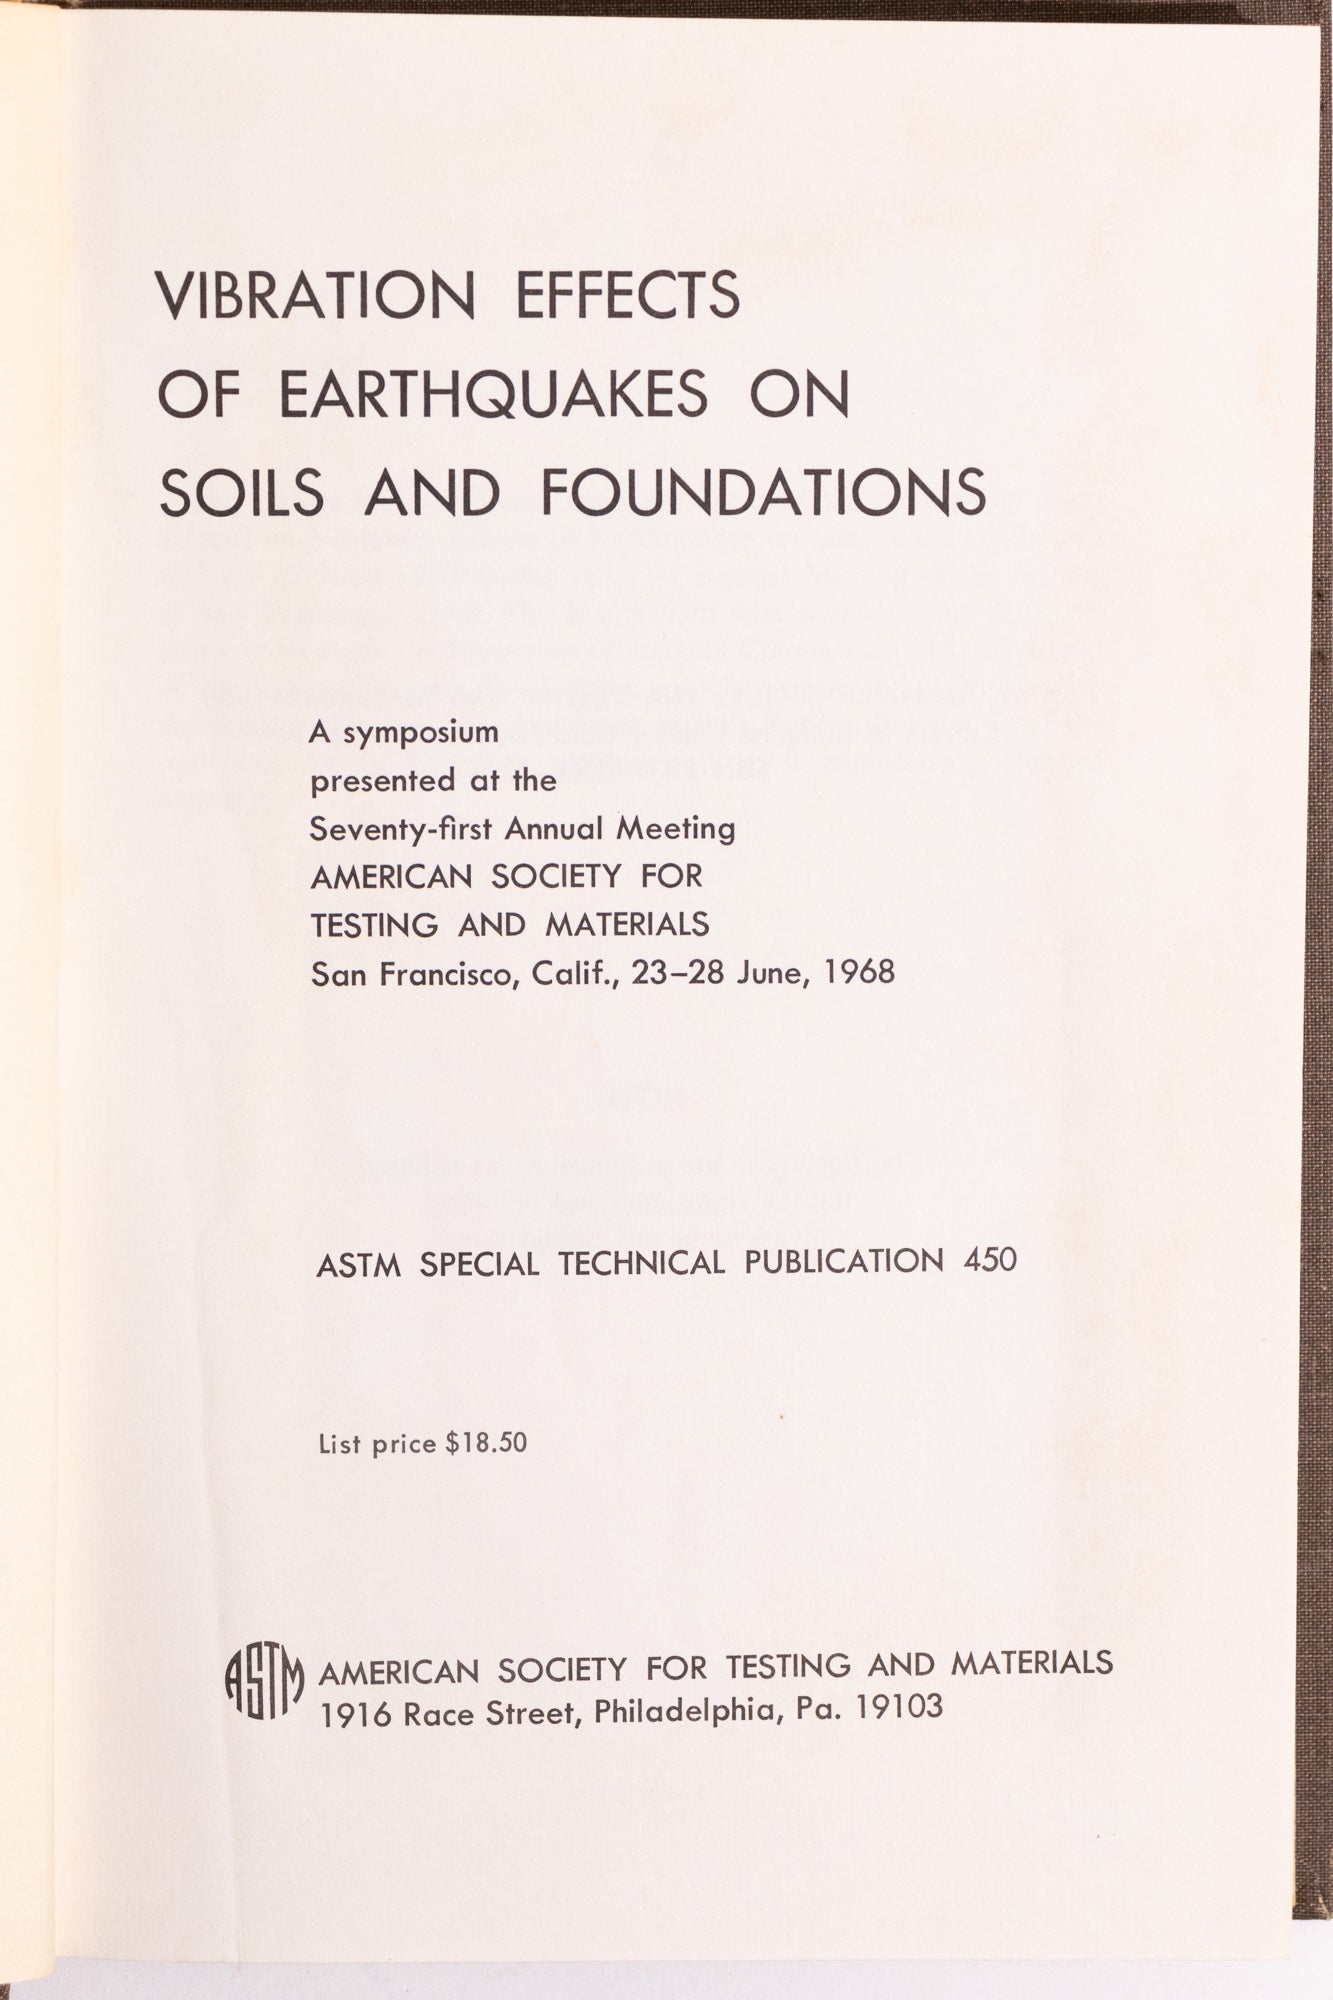 Vibration Effects of Earthquakes on Soils and Foundations